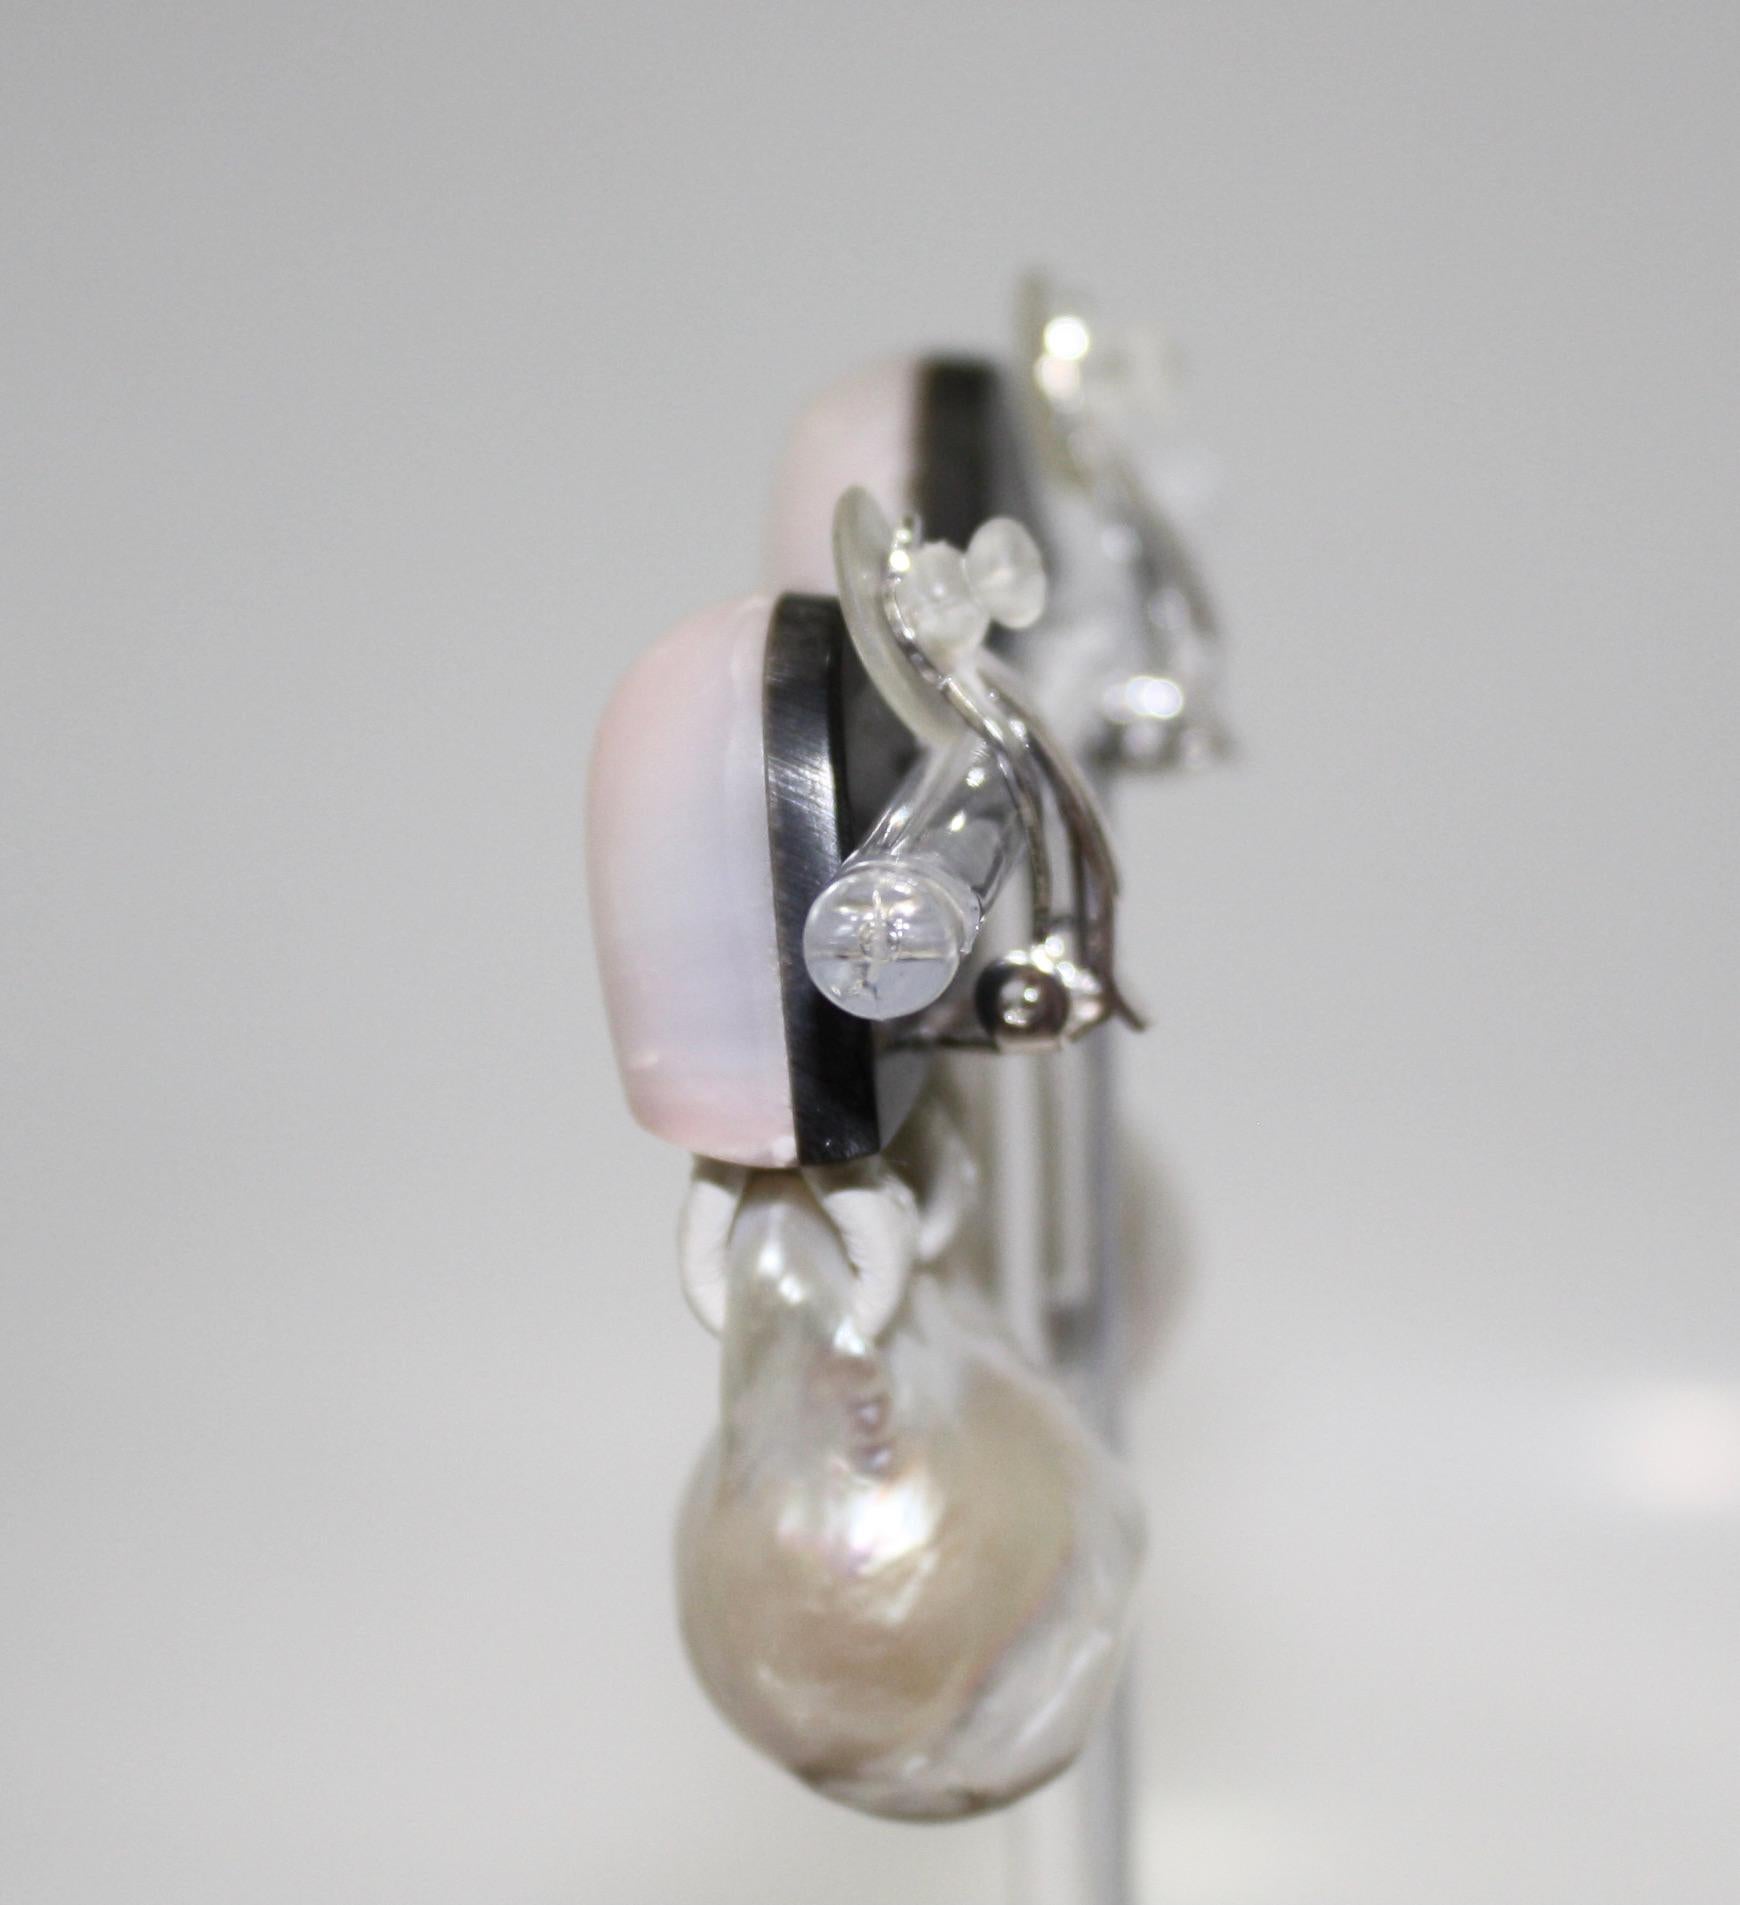 Clip earrings with pink opal top stone , baroque pearls threaded through white stitched leather.